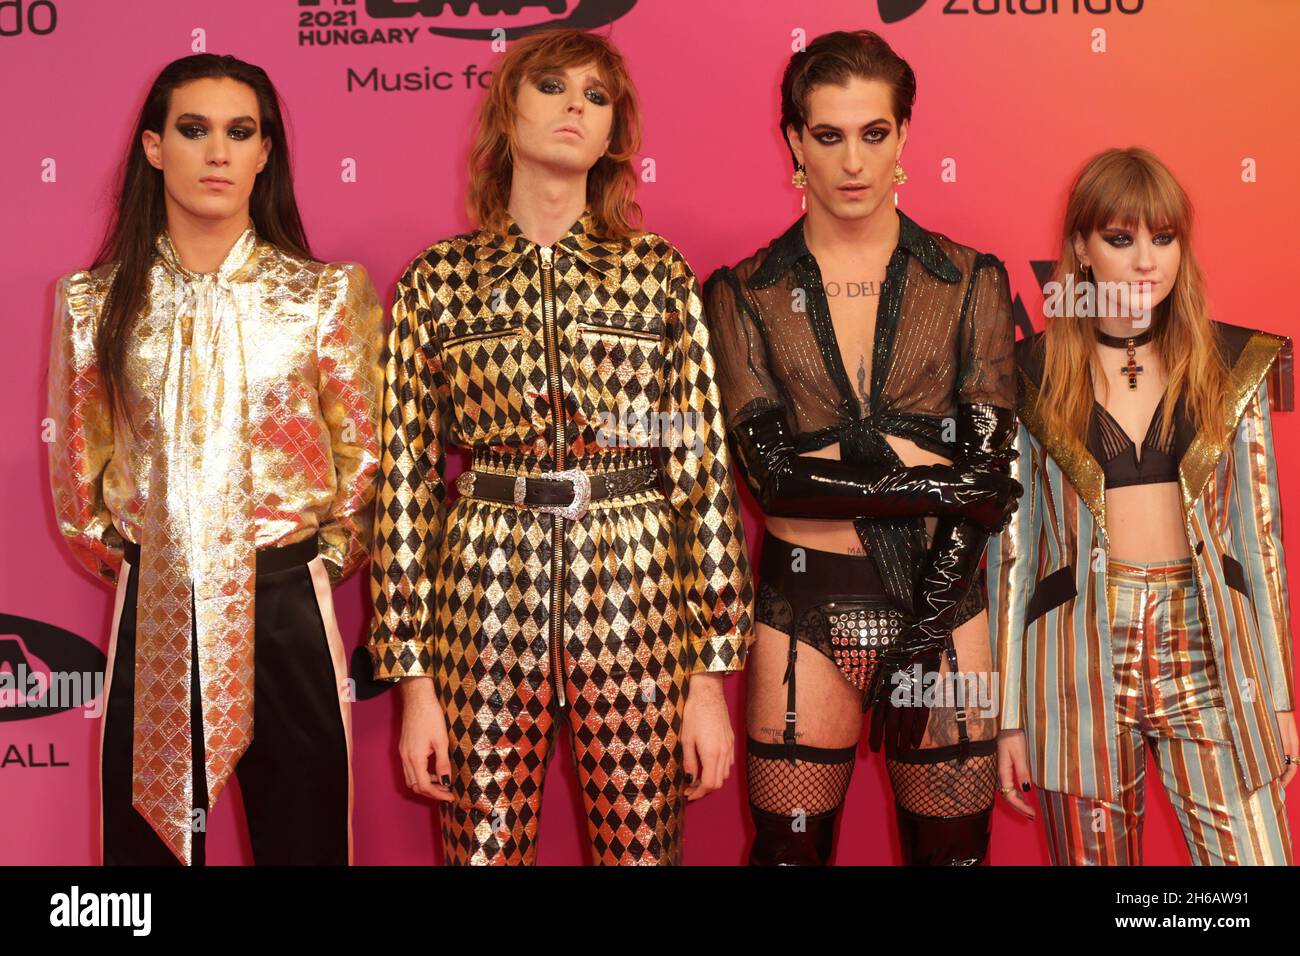 Budapest, Hungary. 14th Nov, 2021. (From L to R) Ethan Torchio, Thomas Raggi, Damiano David and Victoria De Angelis of the band Maneskin arrive at the MTV Europe Music Awards in Budapest, Hungary on Sunday, November 14, 2021. Photo by Sven Hoogerhuis/UPI Credit: UPI/Alamy Live News Stock Photo